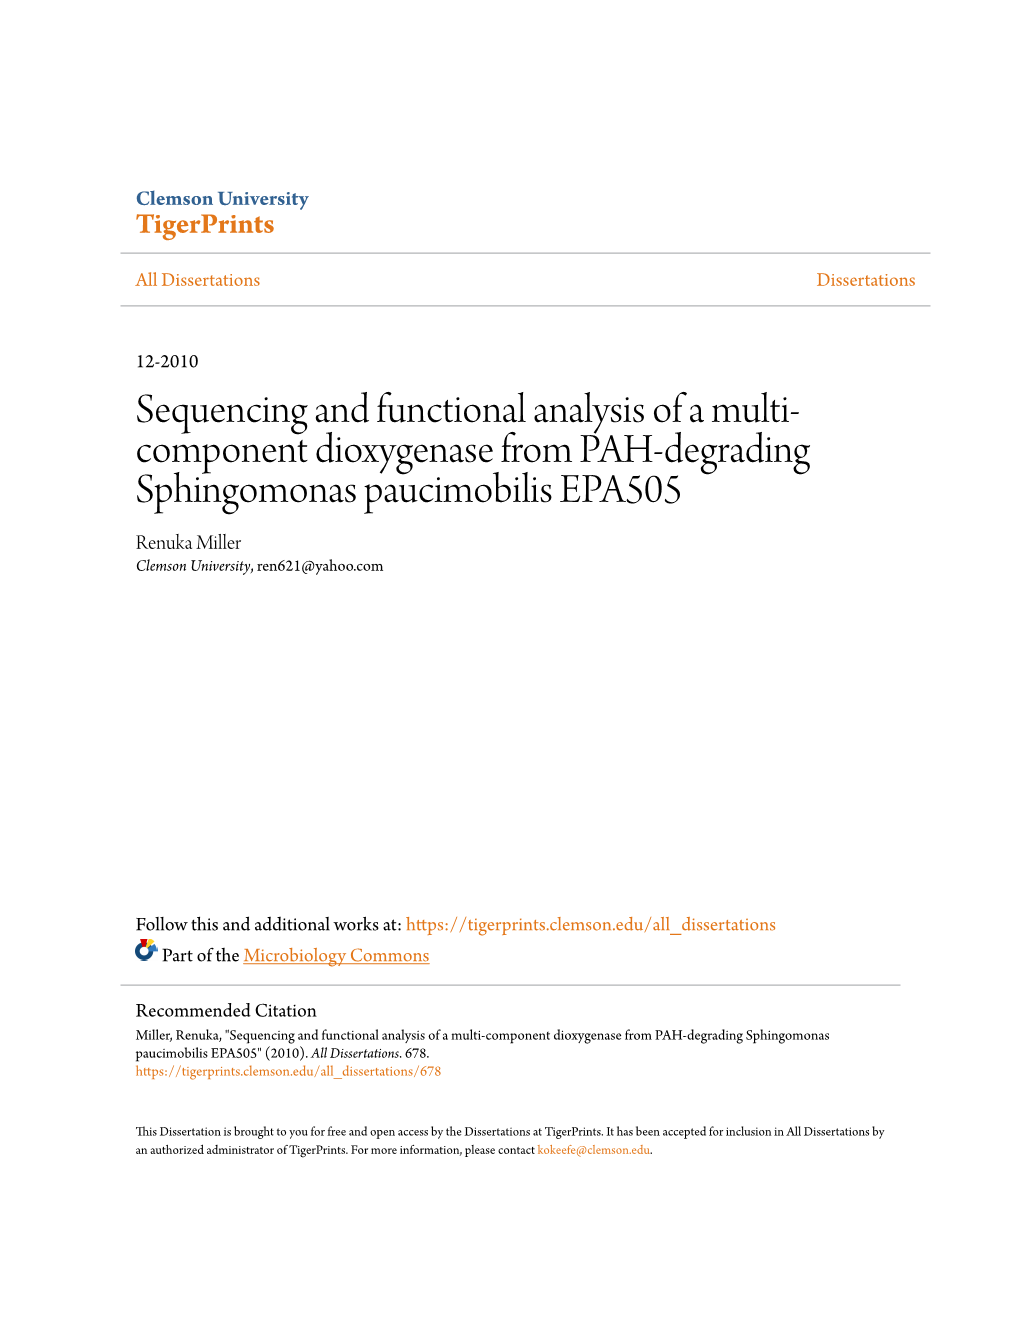 Sequencing and Functional Analysis of a Multi-Component Dioxygenase from PAH-Degrading Sphingomonas Paucimobilis EPA505" (2010)